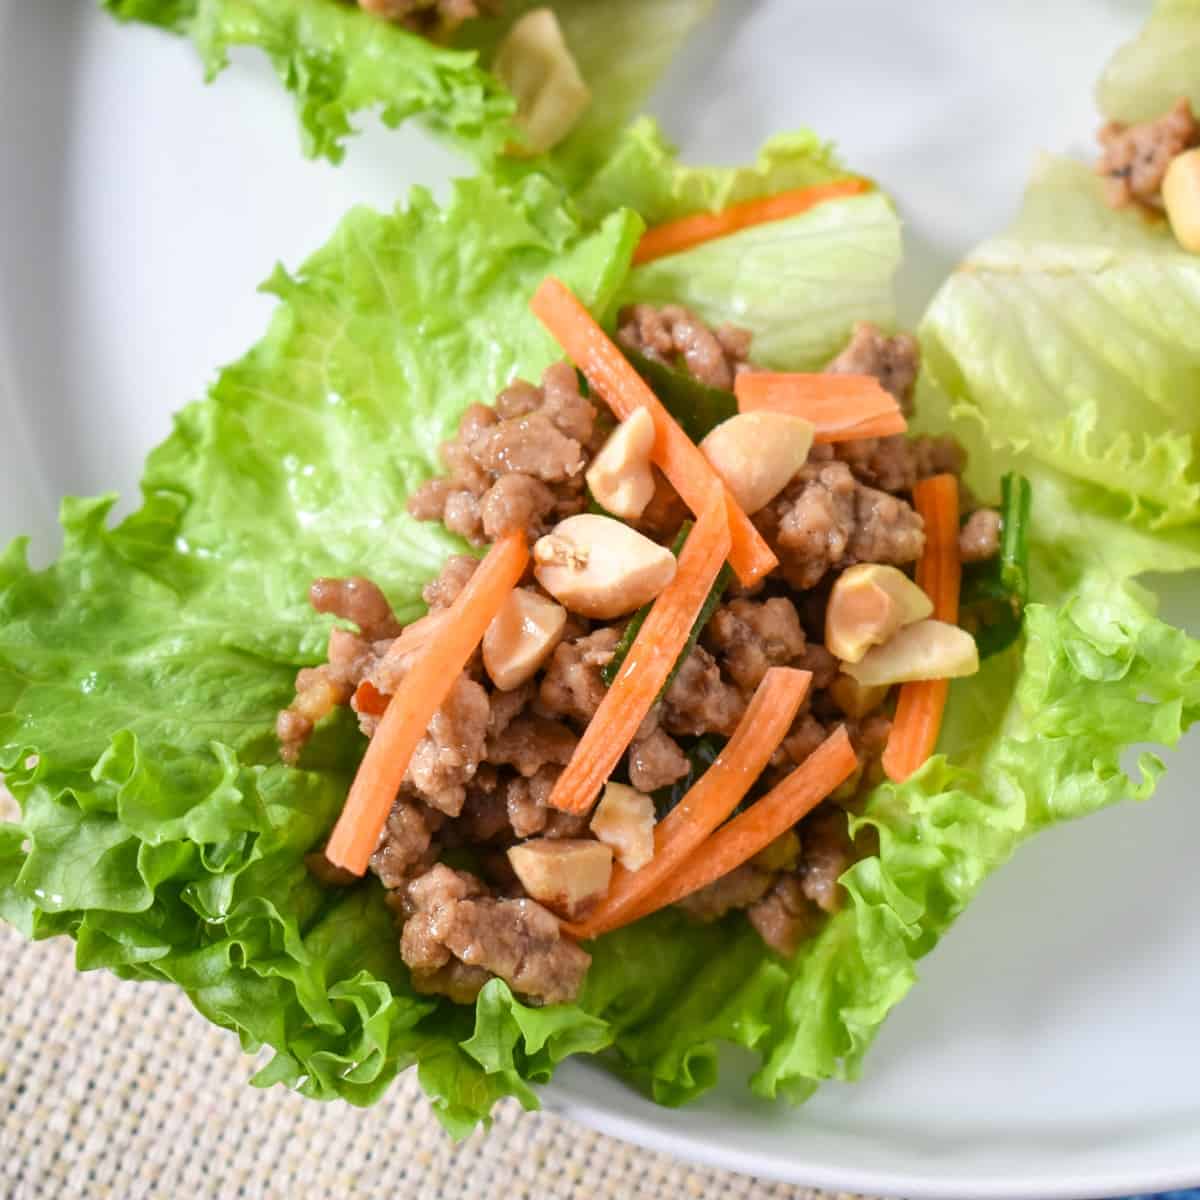 A pork lettuce wrap garnished with shredded carrots and peanuts, served on a white plate.